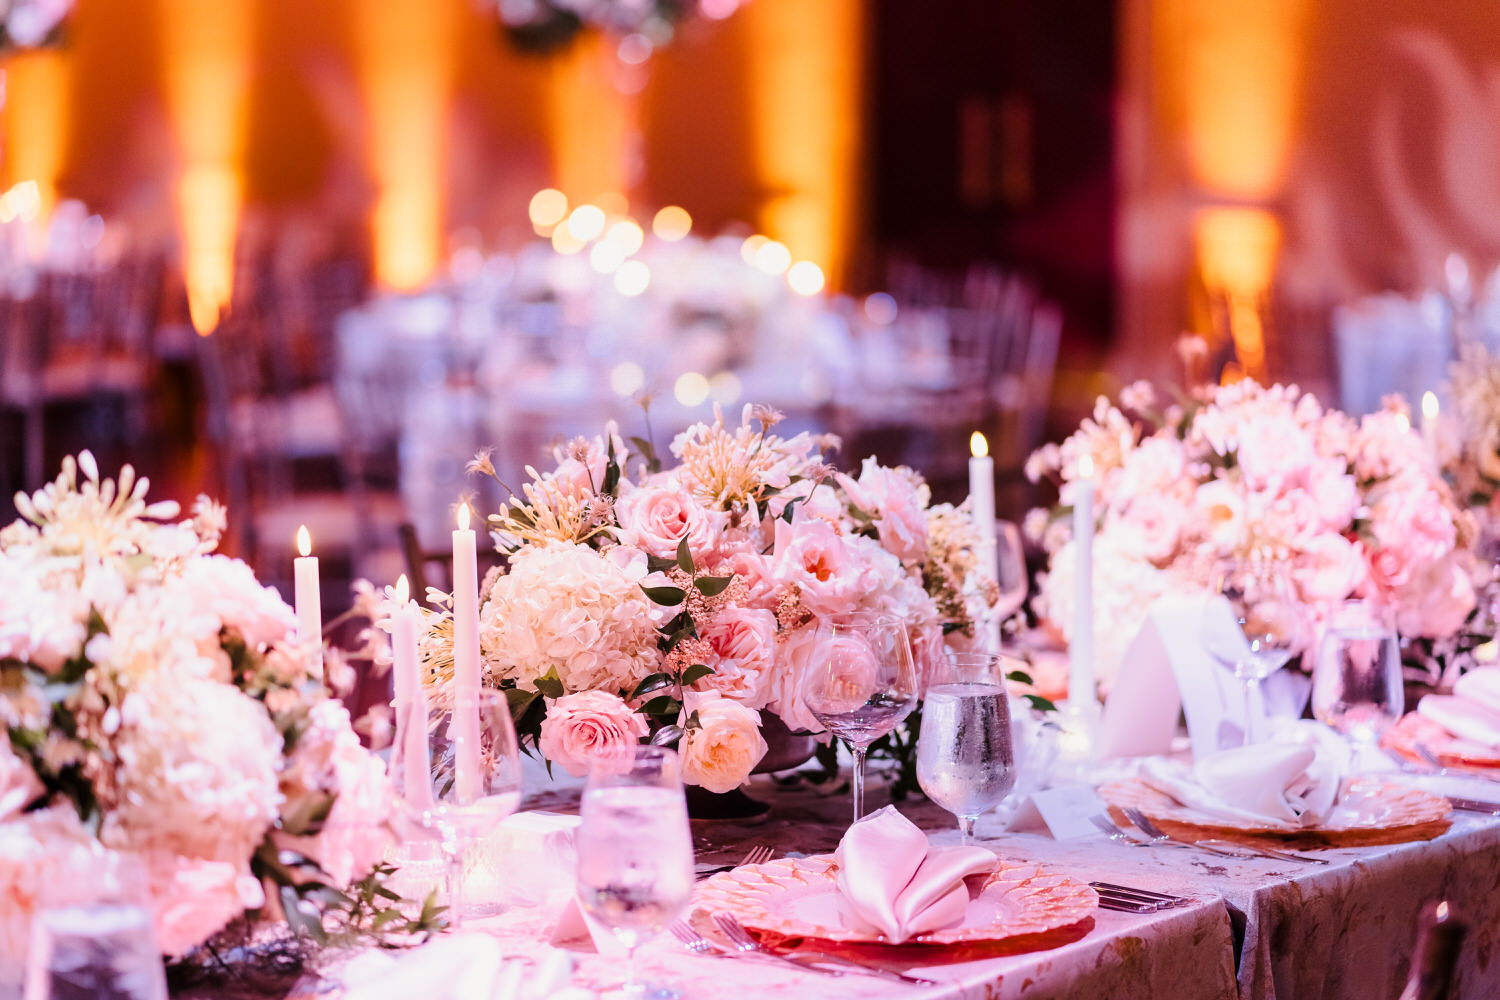 A wedding table set with pink flowers and candles.